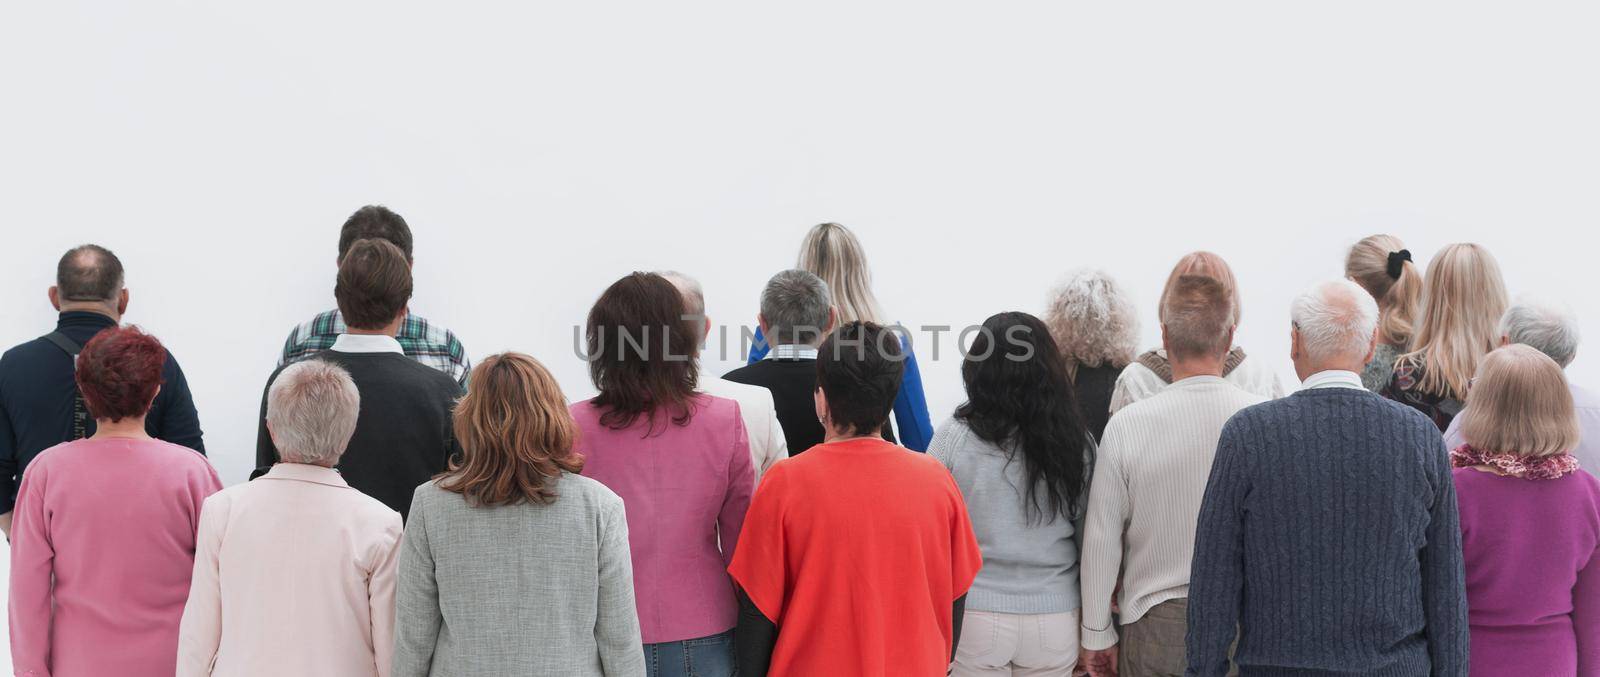 Rear view of a casual group of people looking on blank by asdf